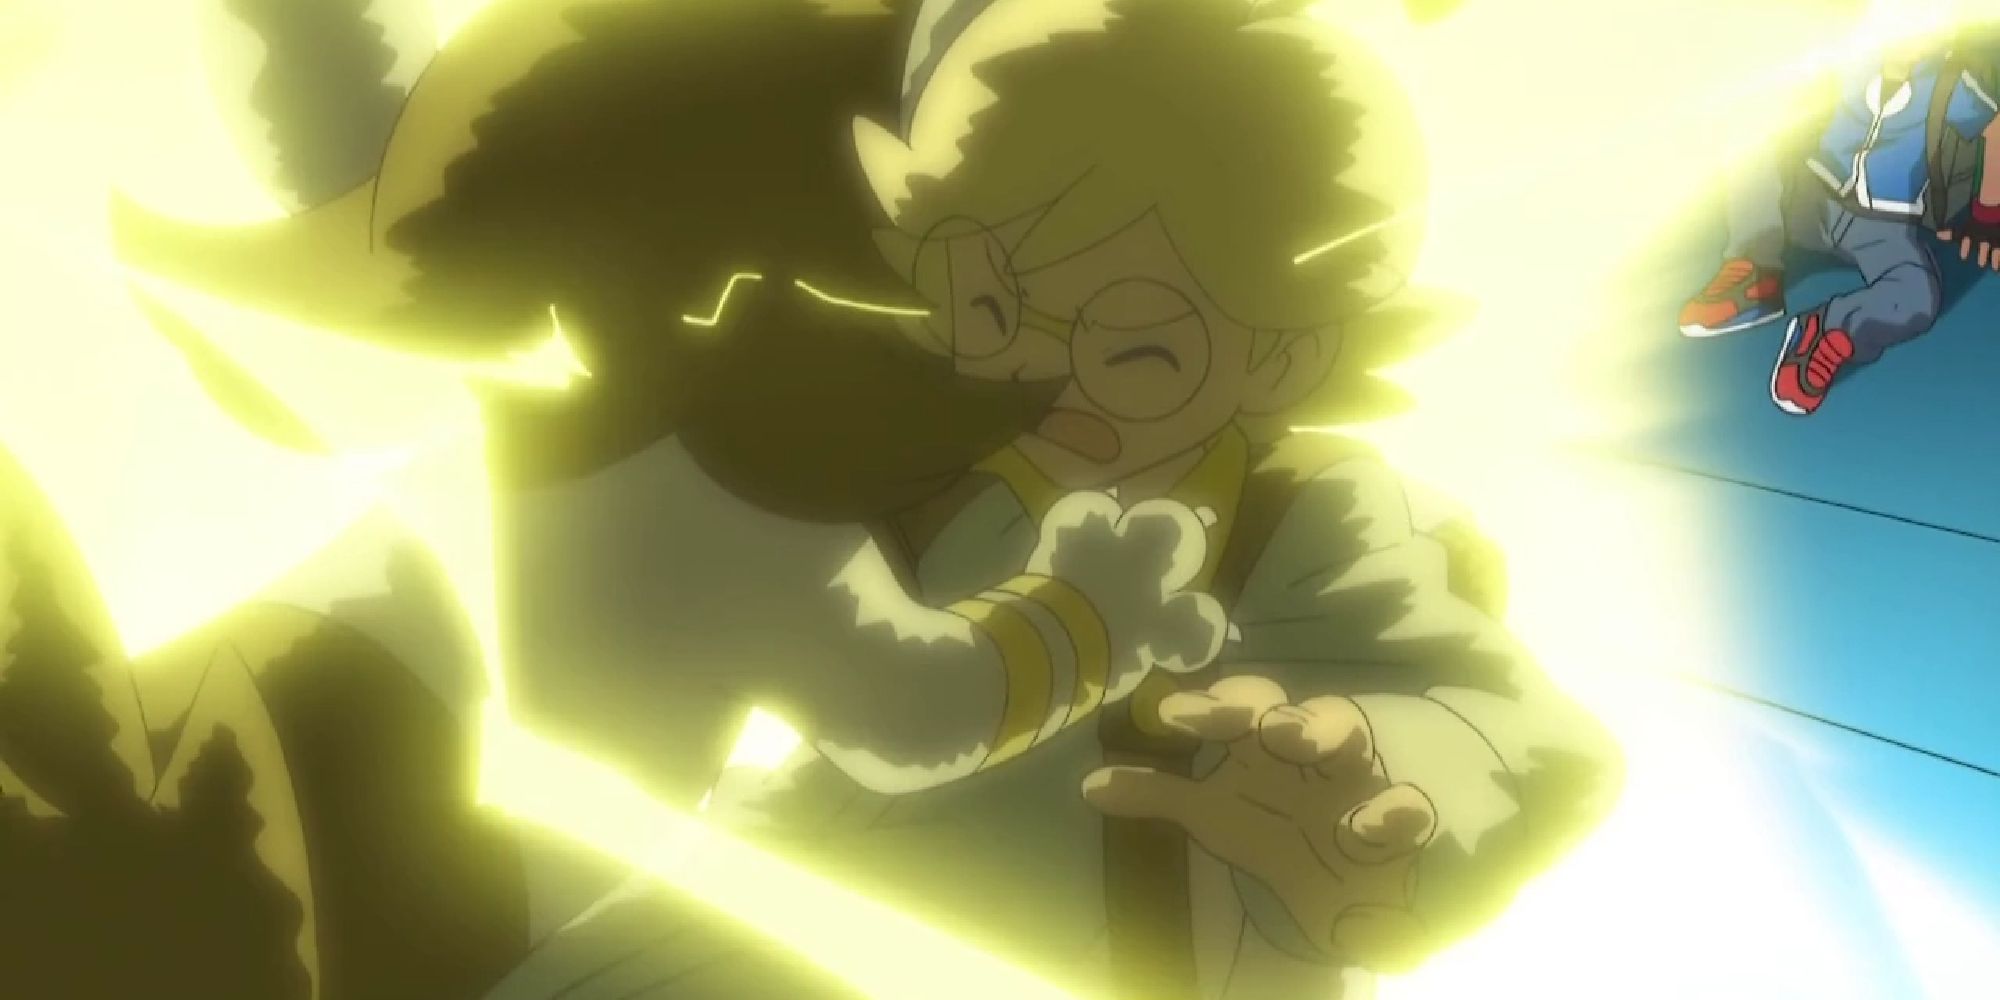 Clemont saving Luxio from an electric blast